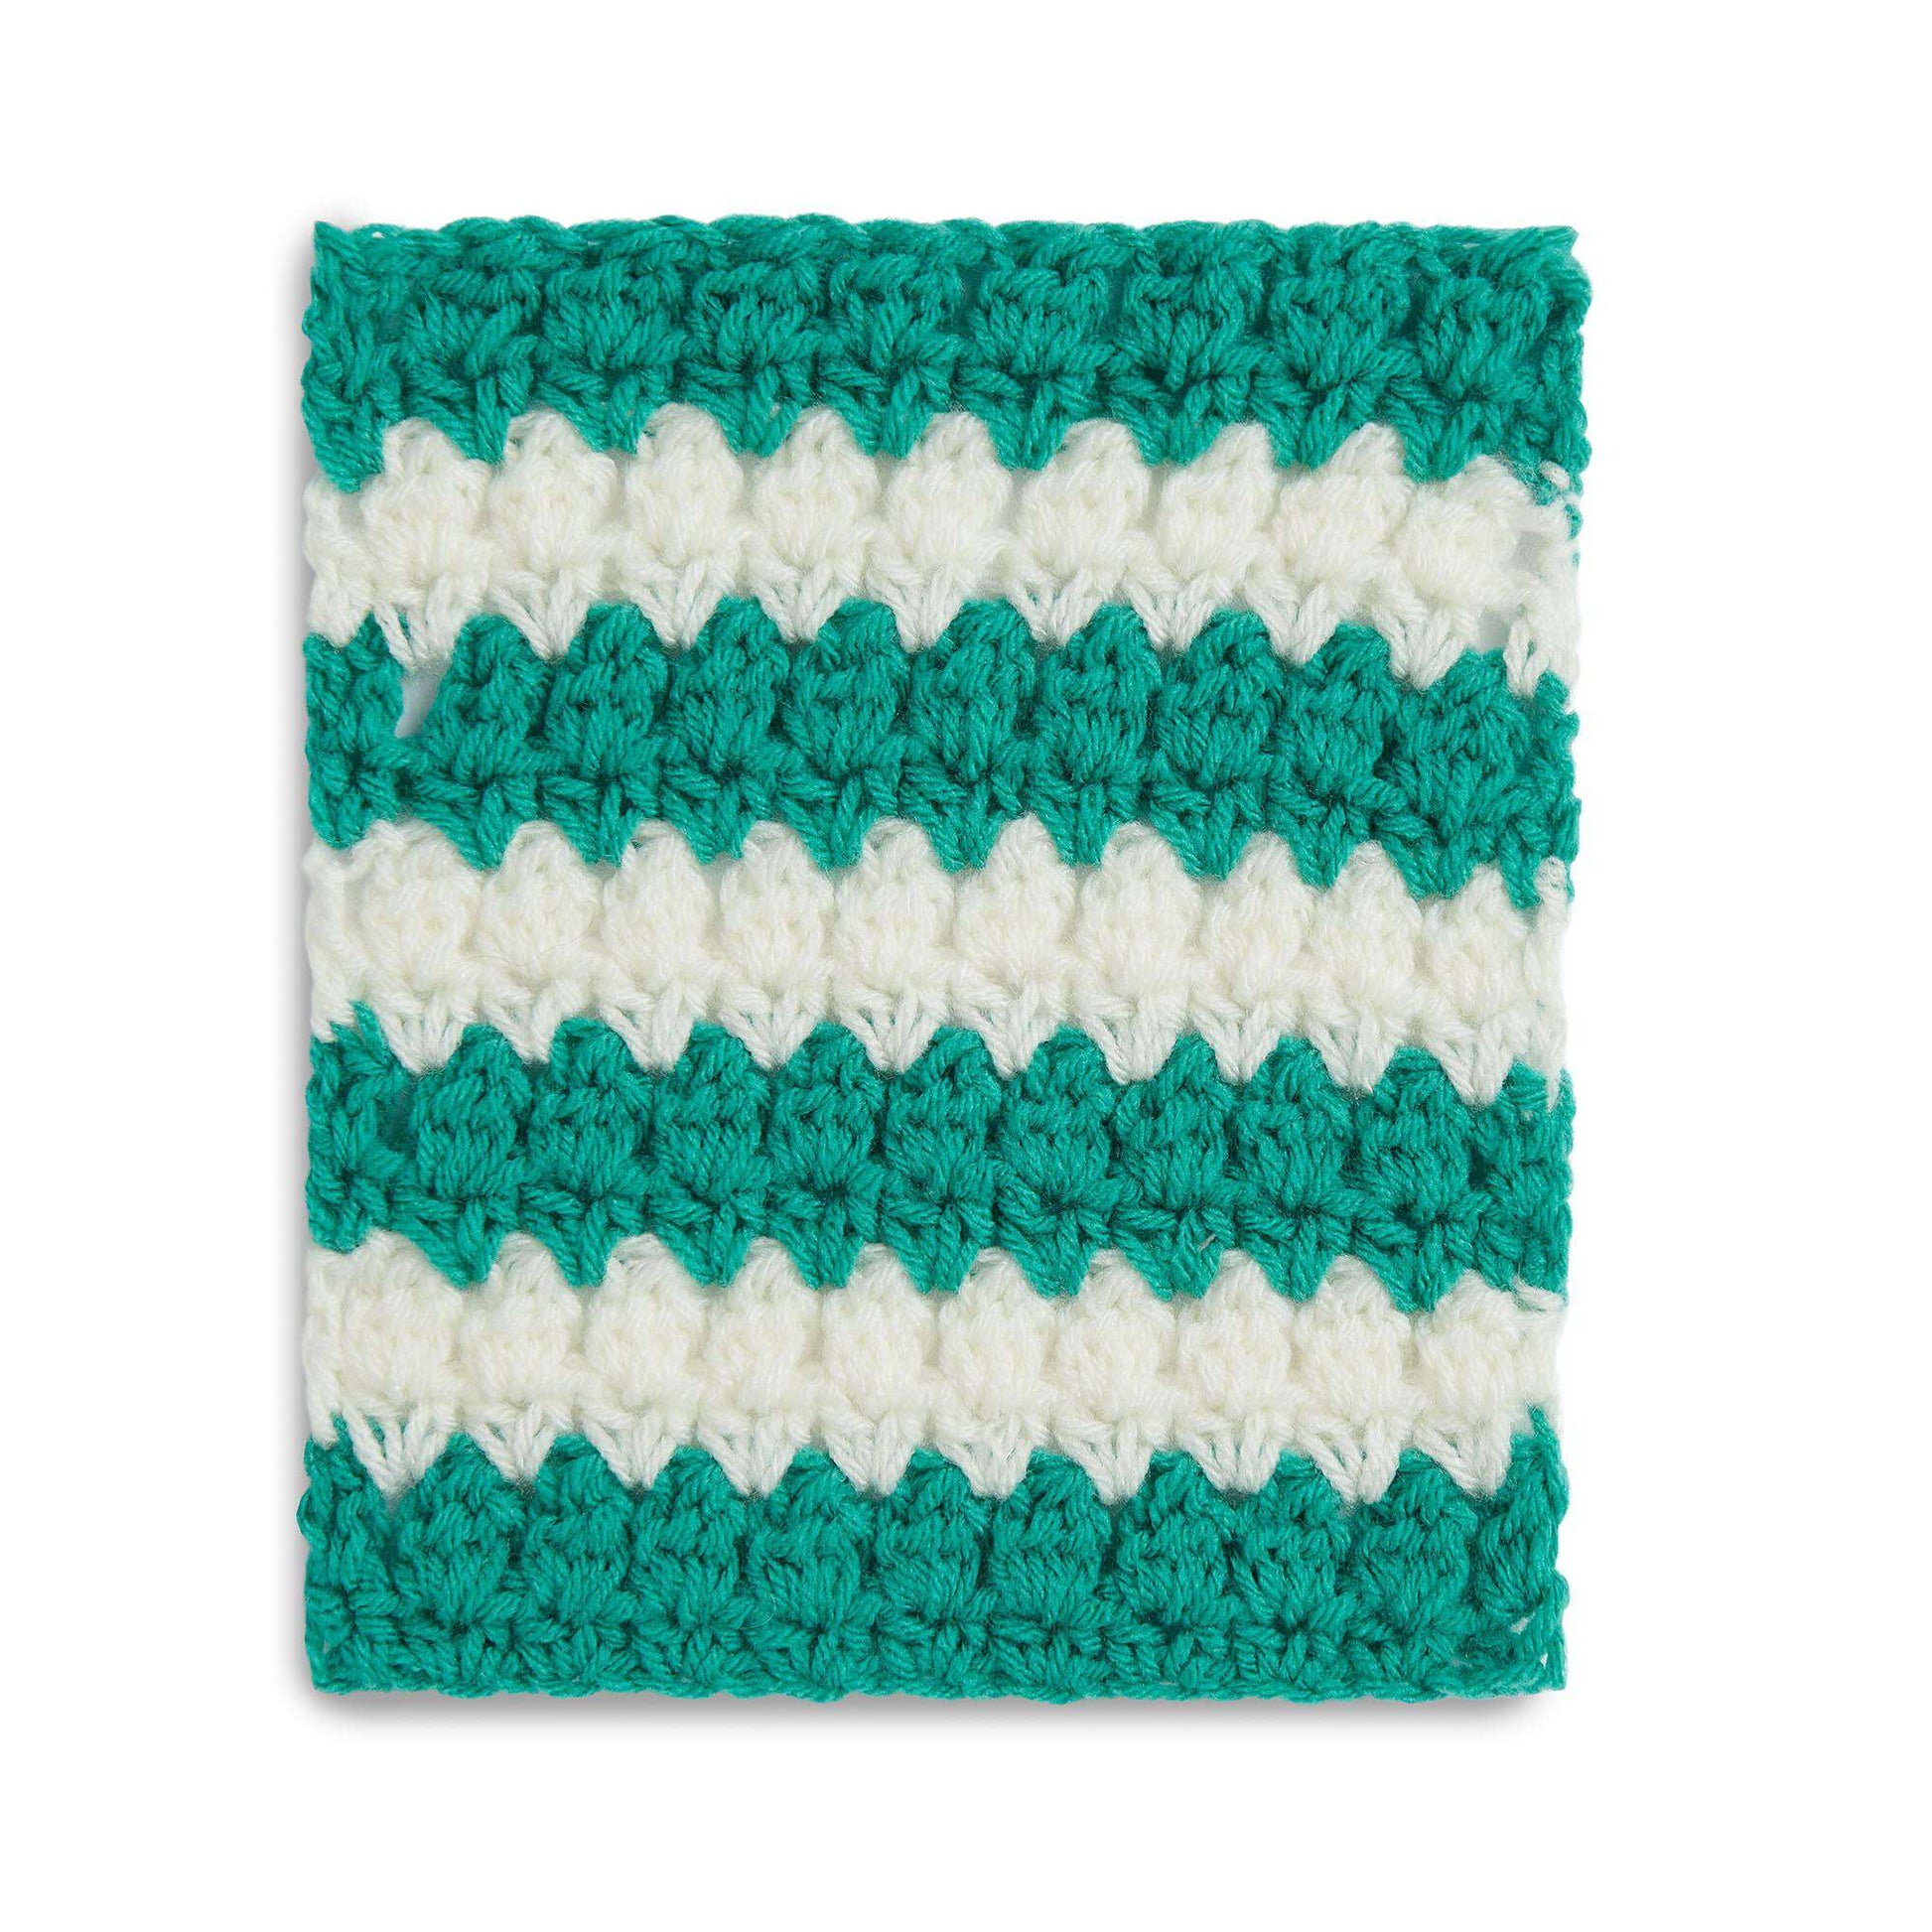 Free Red Heart Crochet Striped Bobbles & V-Stitches Blanket Block For Warm Up America! Pattern